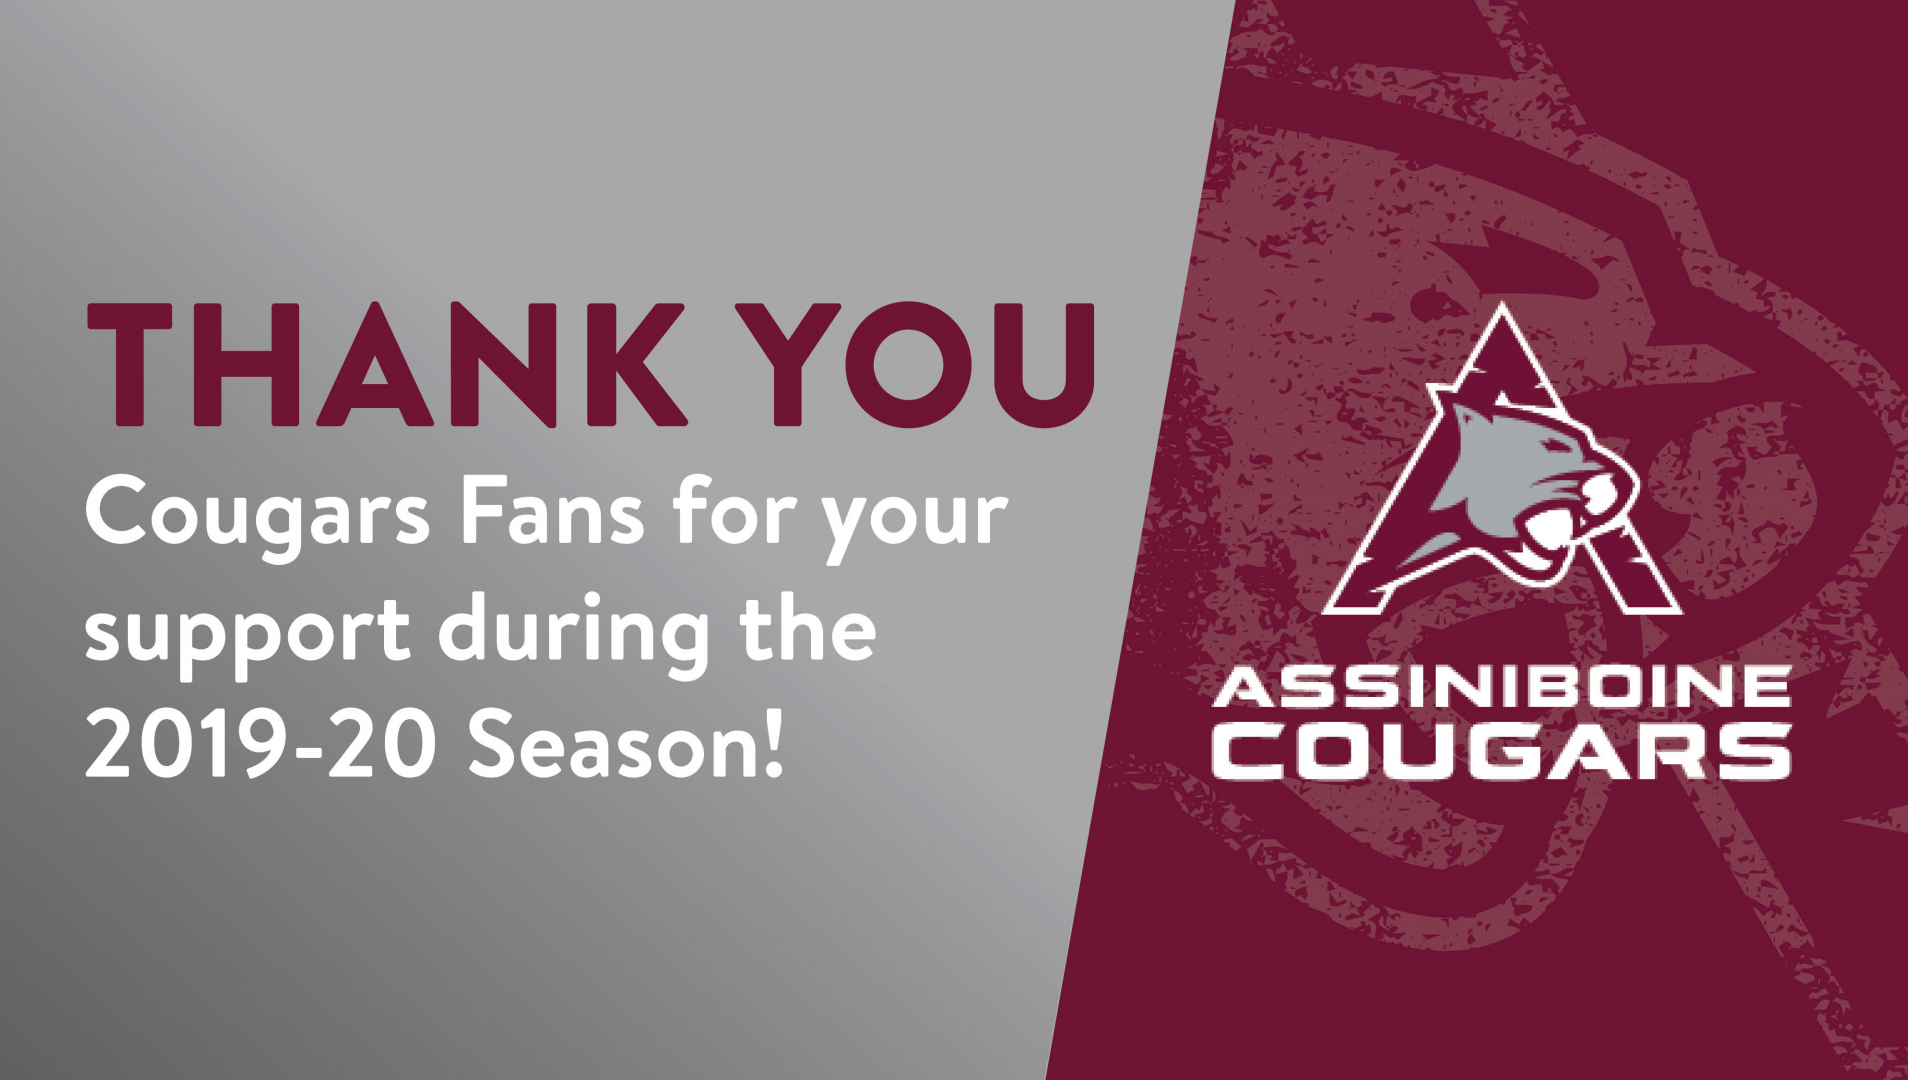 Thank you cougars fans